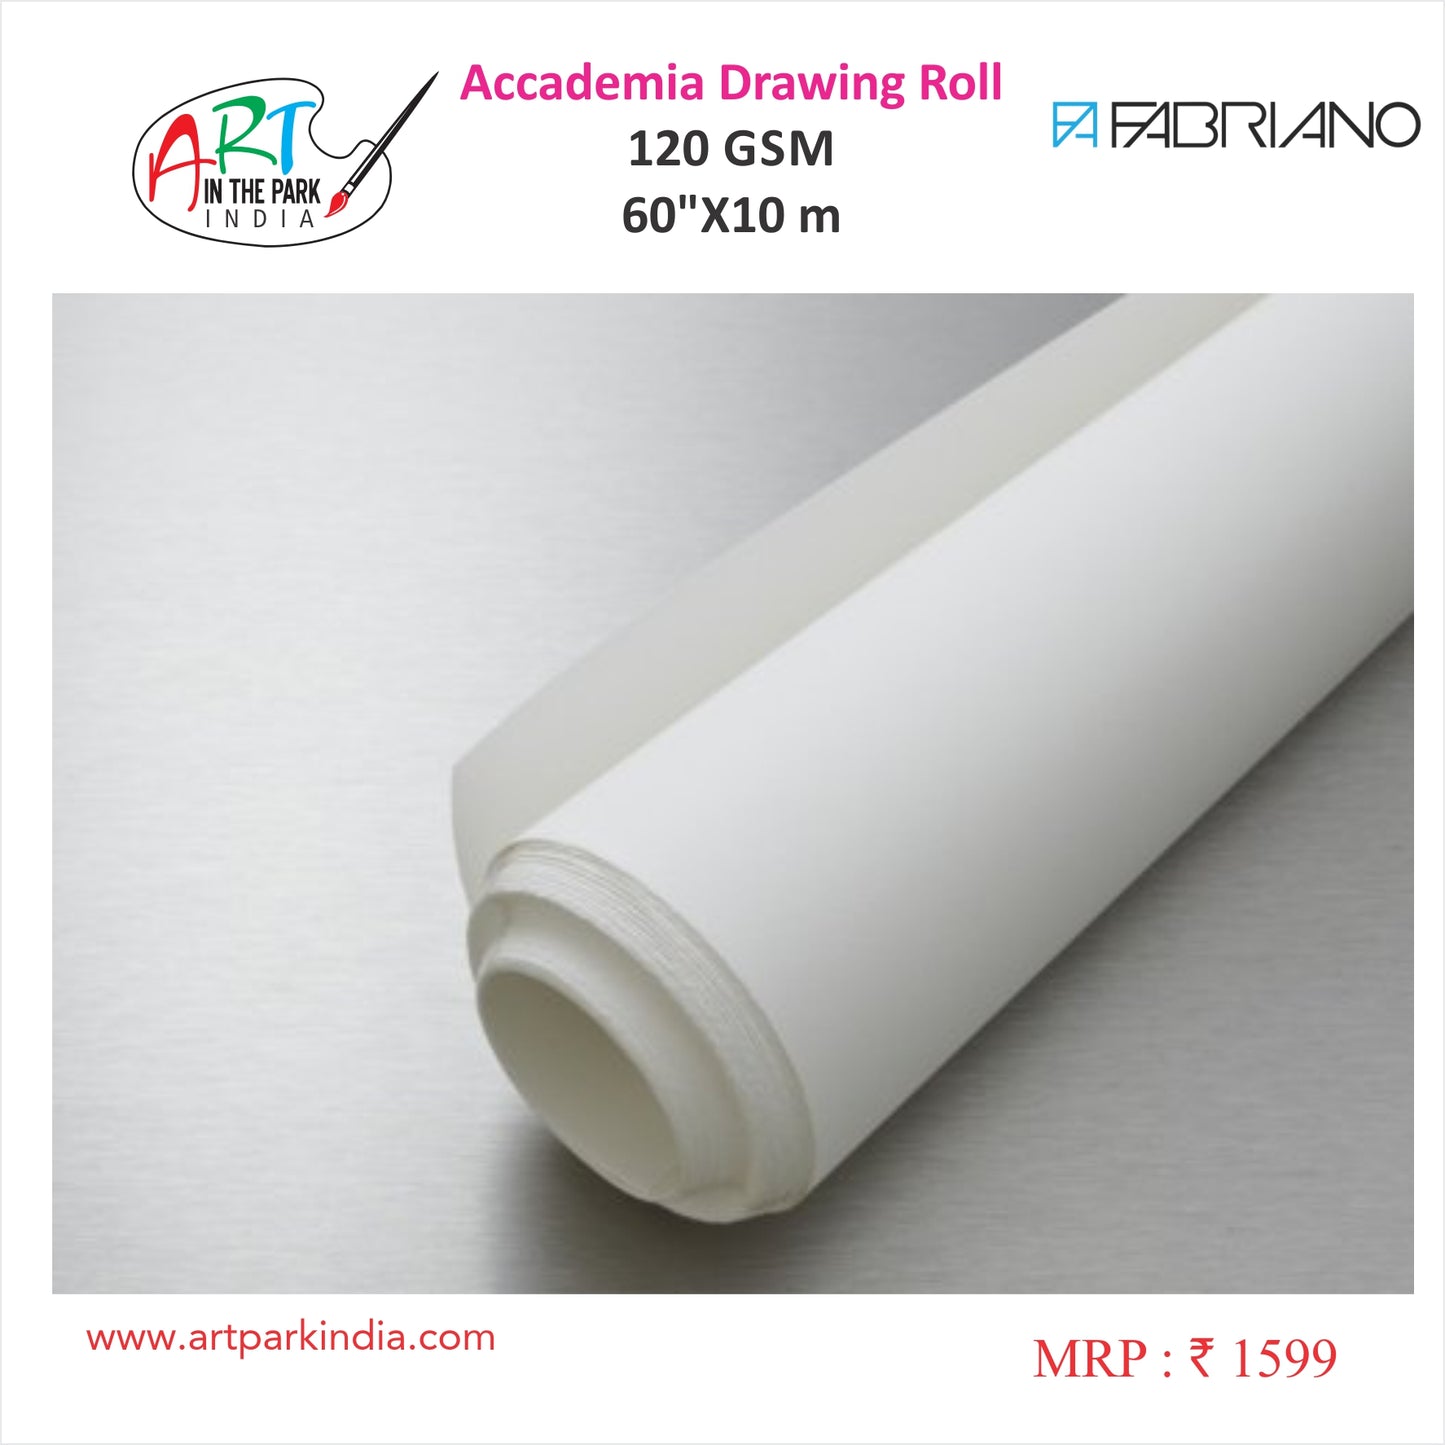 FABRIANO ACCADEMIA DRAWING ROLL 120GSM 60"X10M